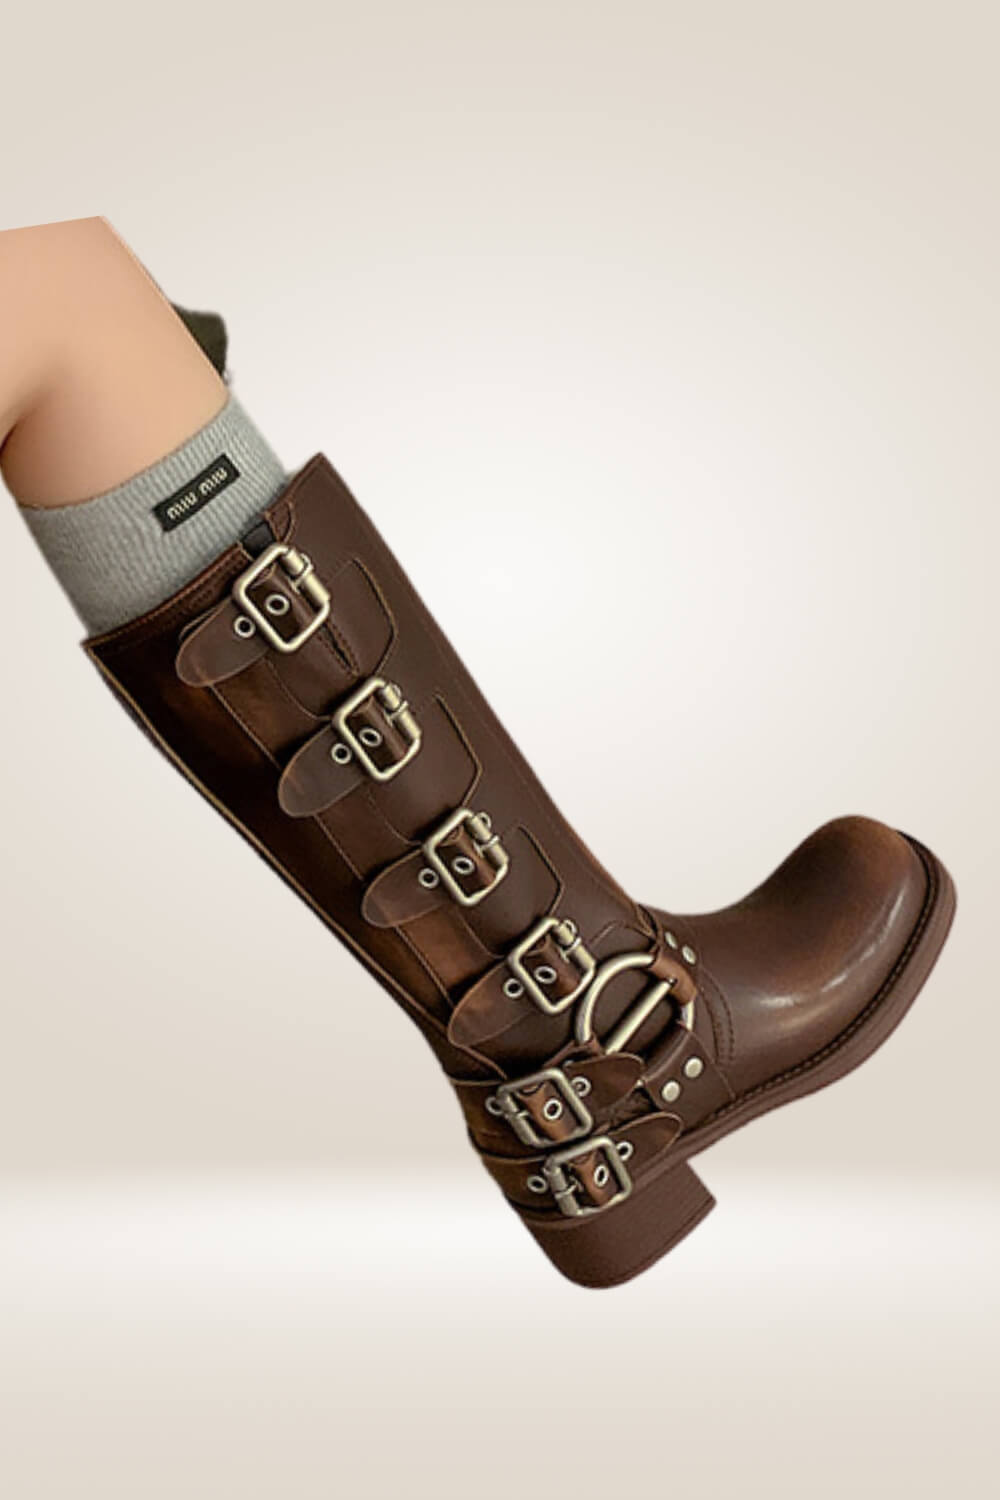 Mid Calf Brown Buckle Boots - TGC Boutique - Boots